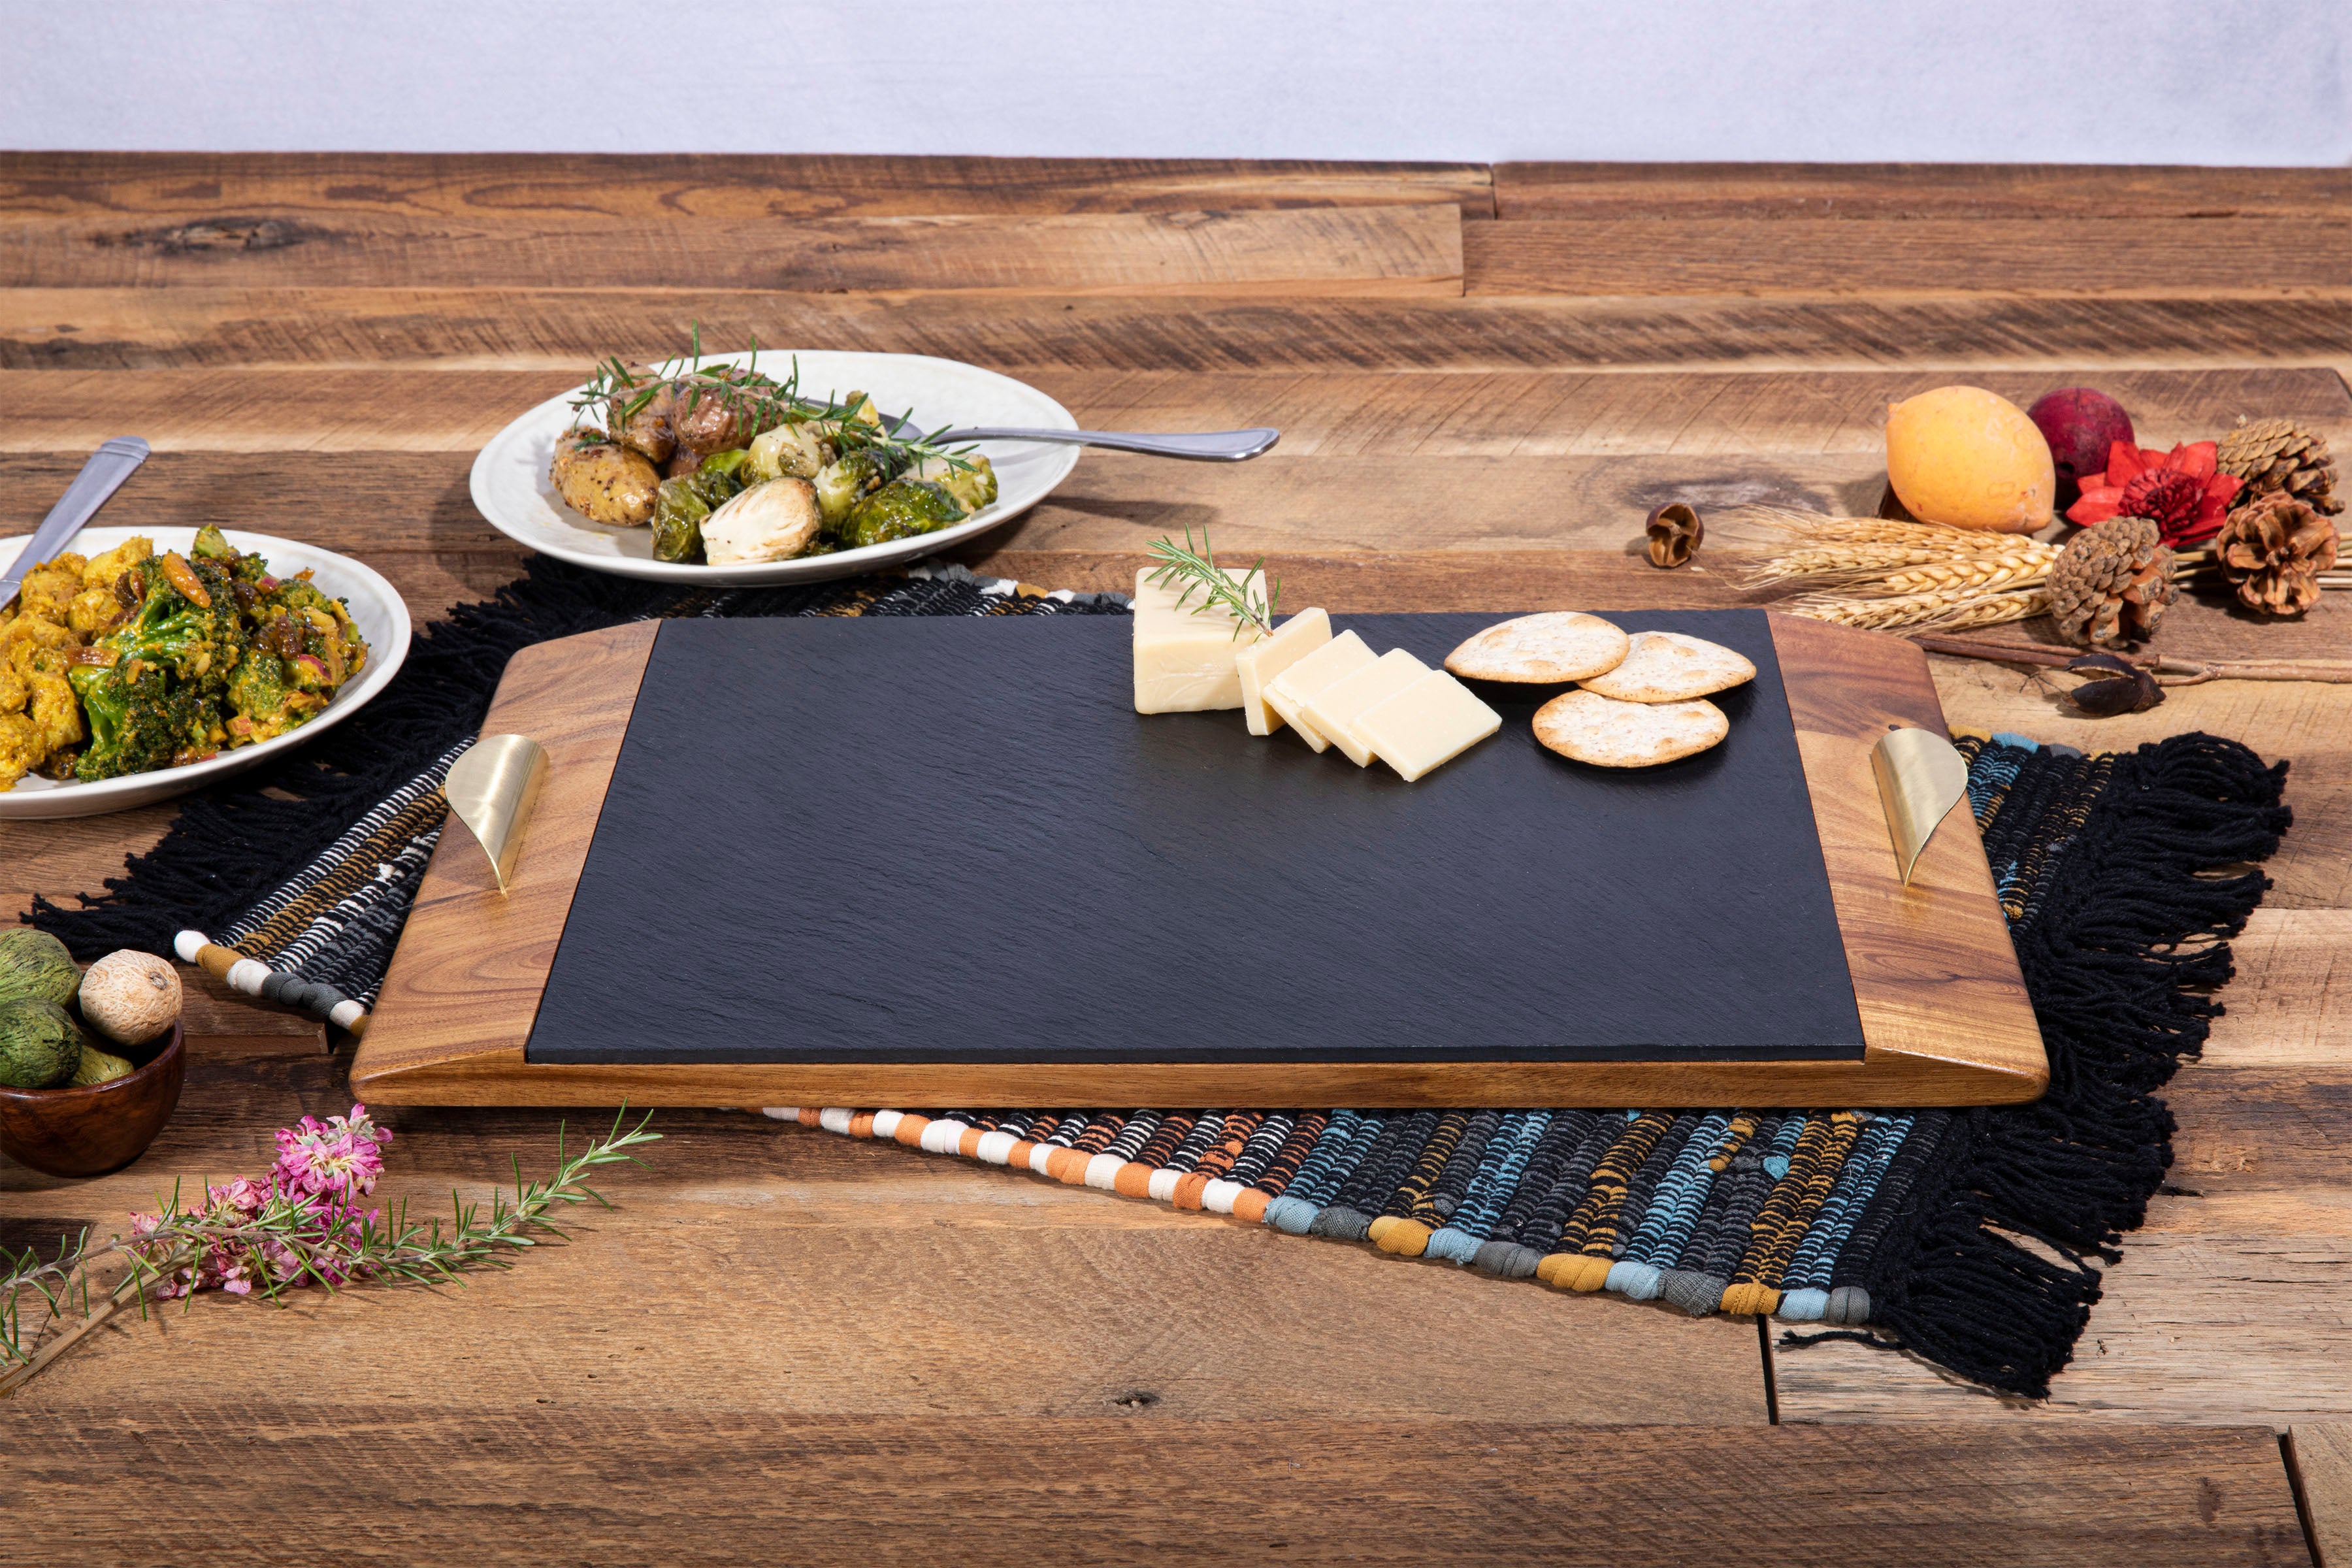 Cleveland Browns - Covina Acacia and Slate Serving Tray